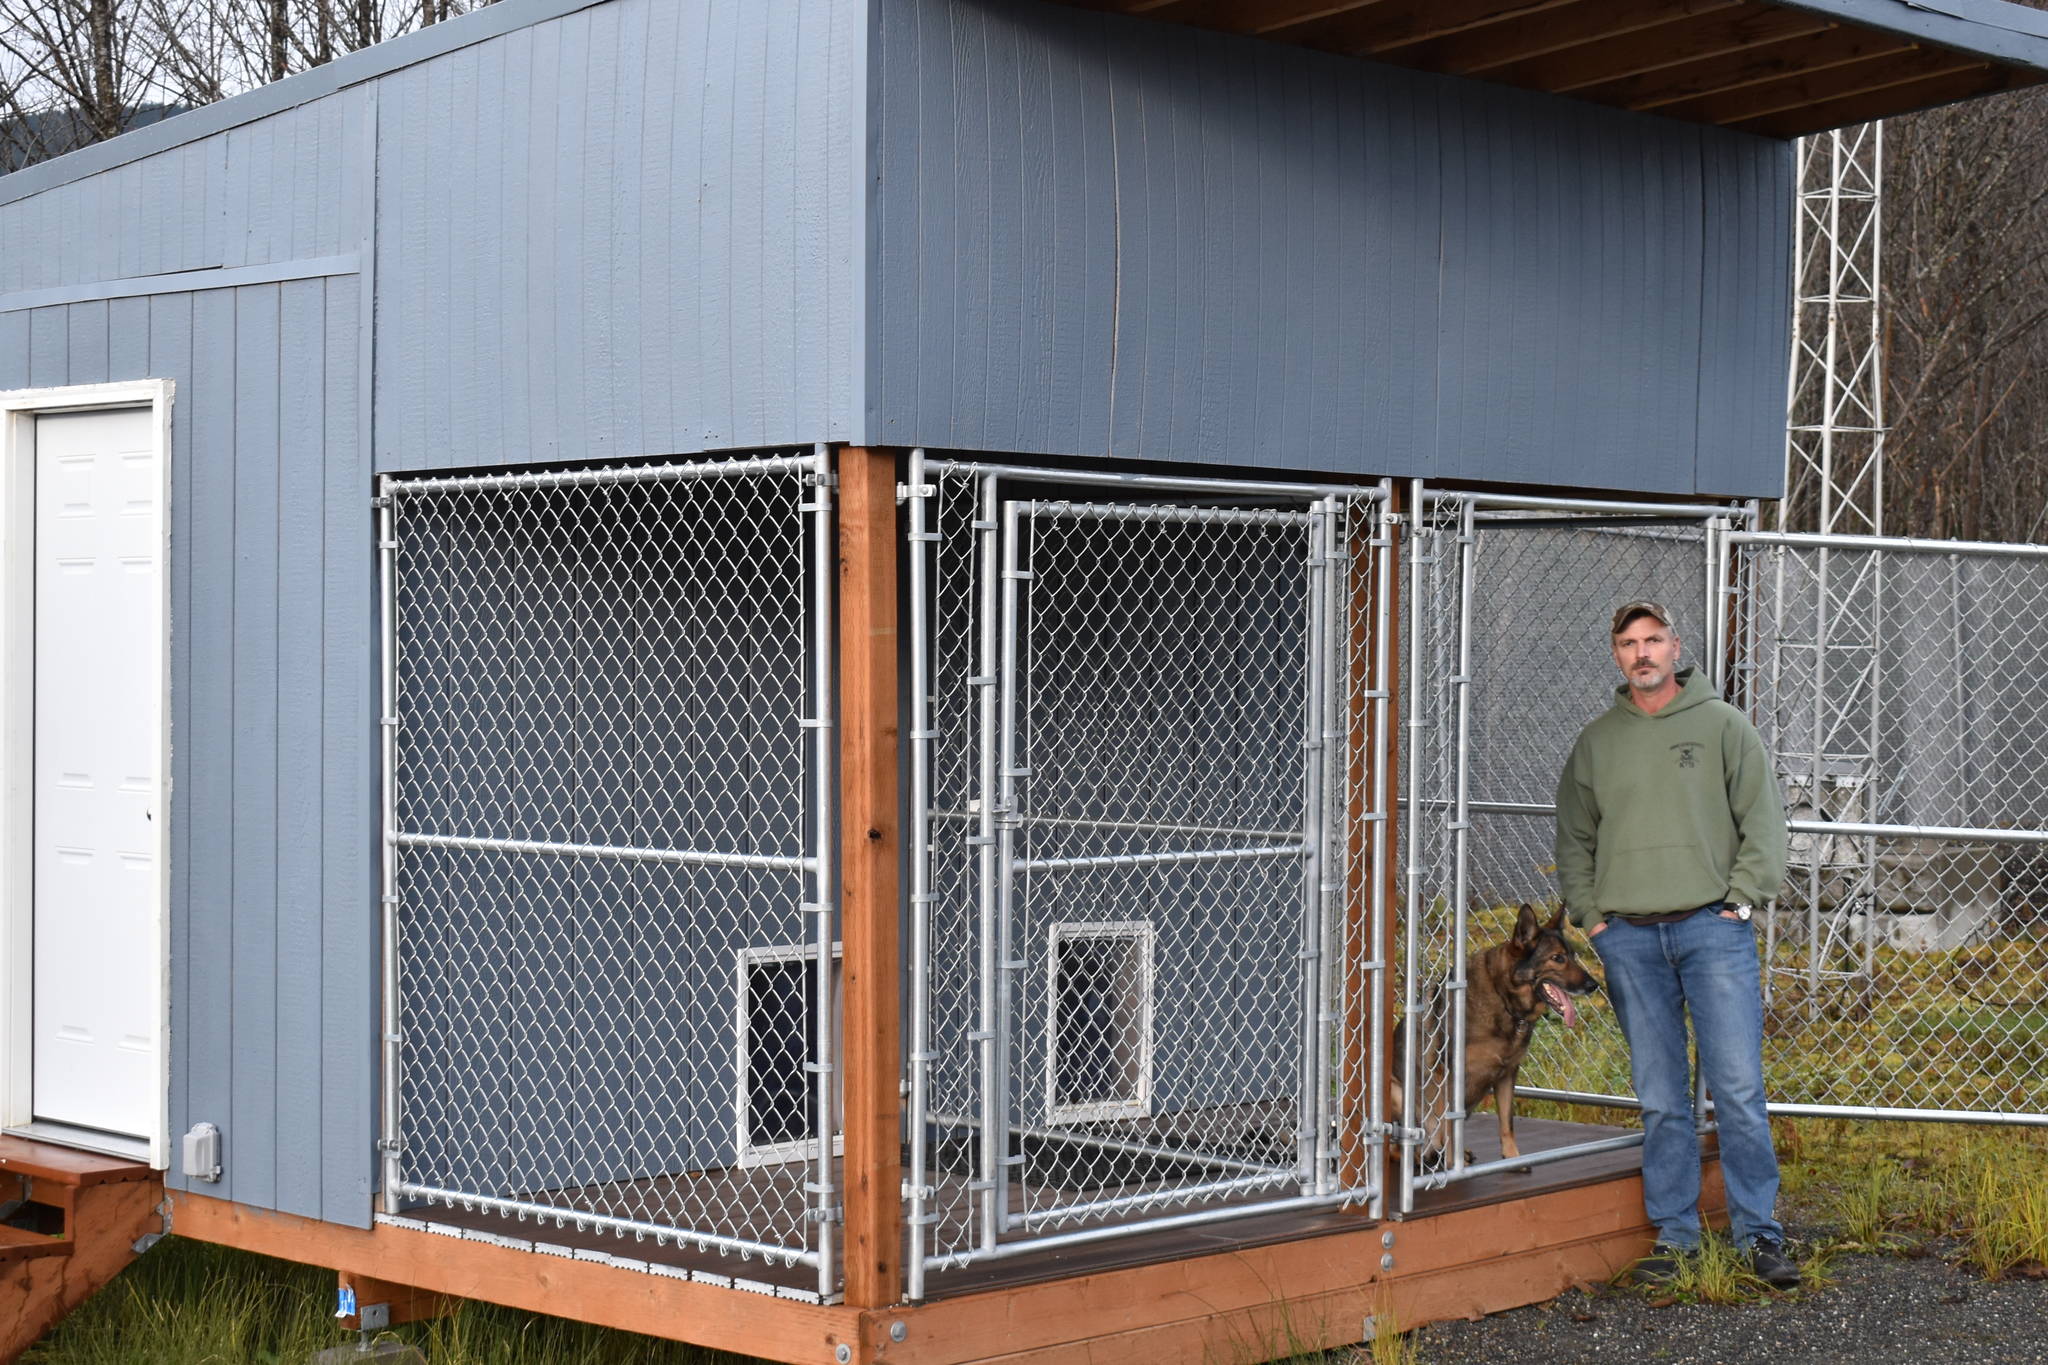 Juneau Police Department narcotics dog Buddy and handler Officer Mike Wise pose with Buddy’s new kennel, assembled with funds raised by the Juneau Crime Line. (Courtesy photo / Robin Paul)